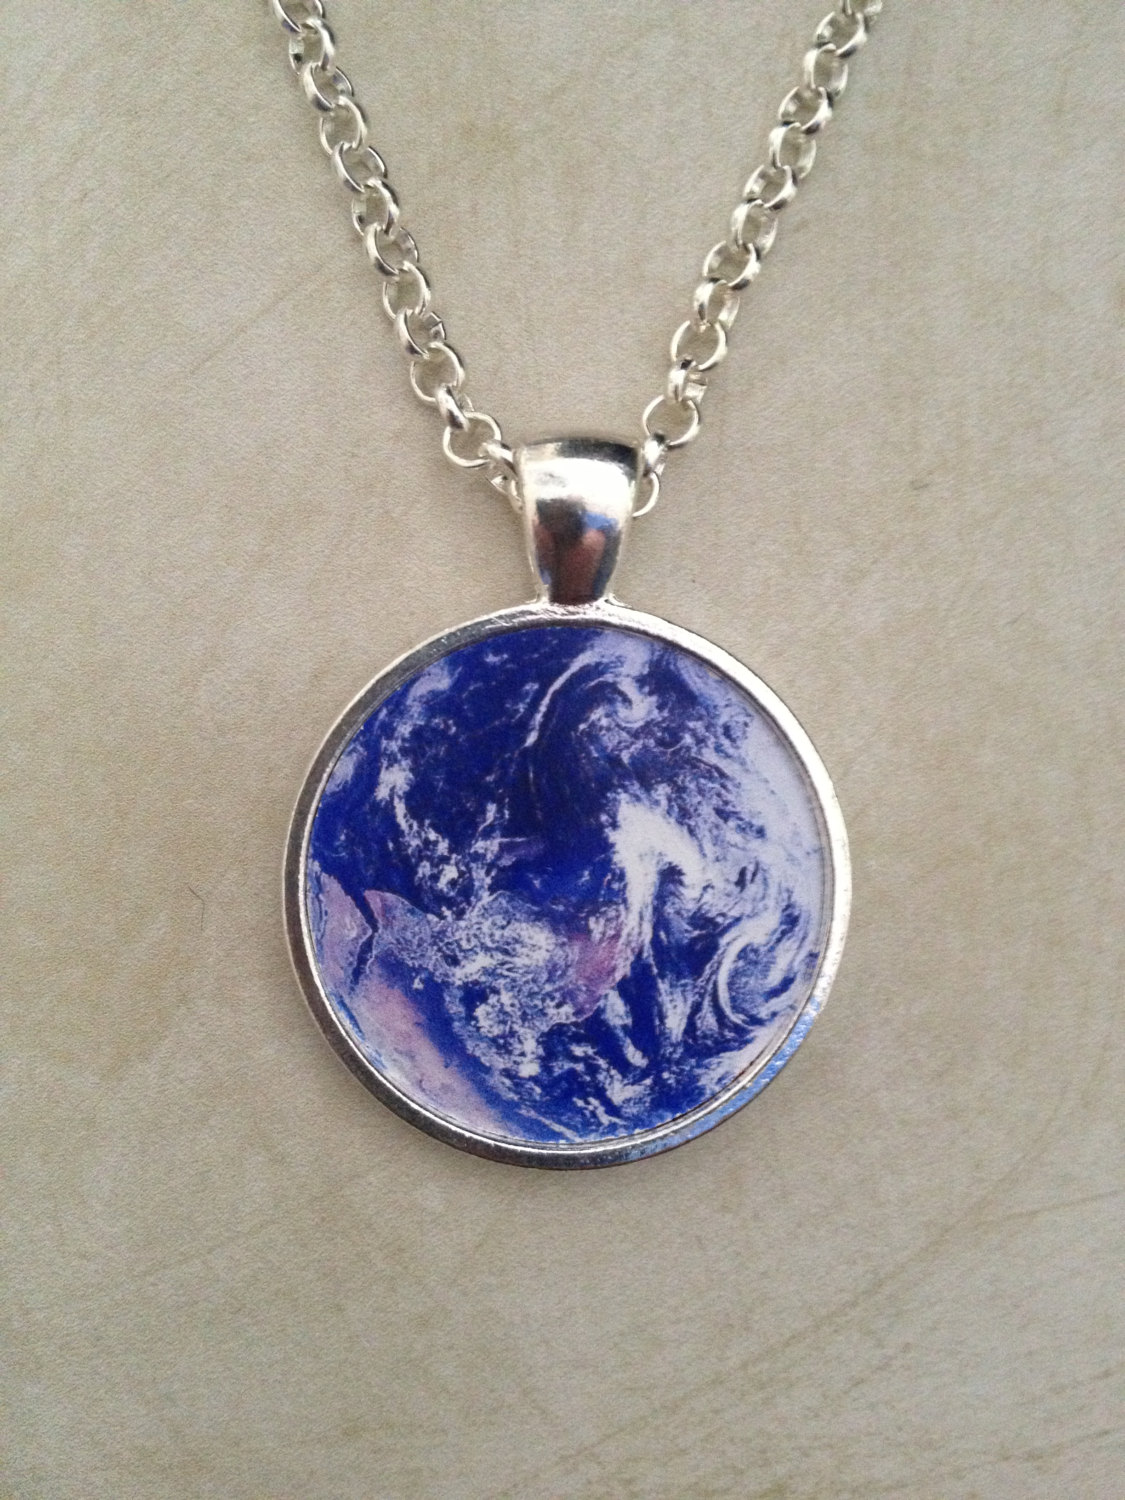 Buy 2 Get 1 3d Planet Earth Glass Dome Pendant Necklace Or Key Chain Can Be Personalized With Your Own Photo & Name